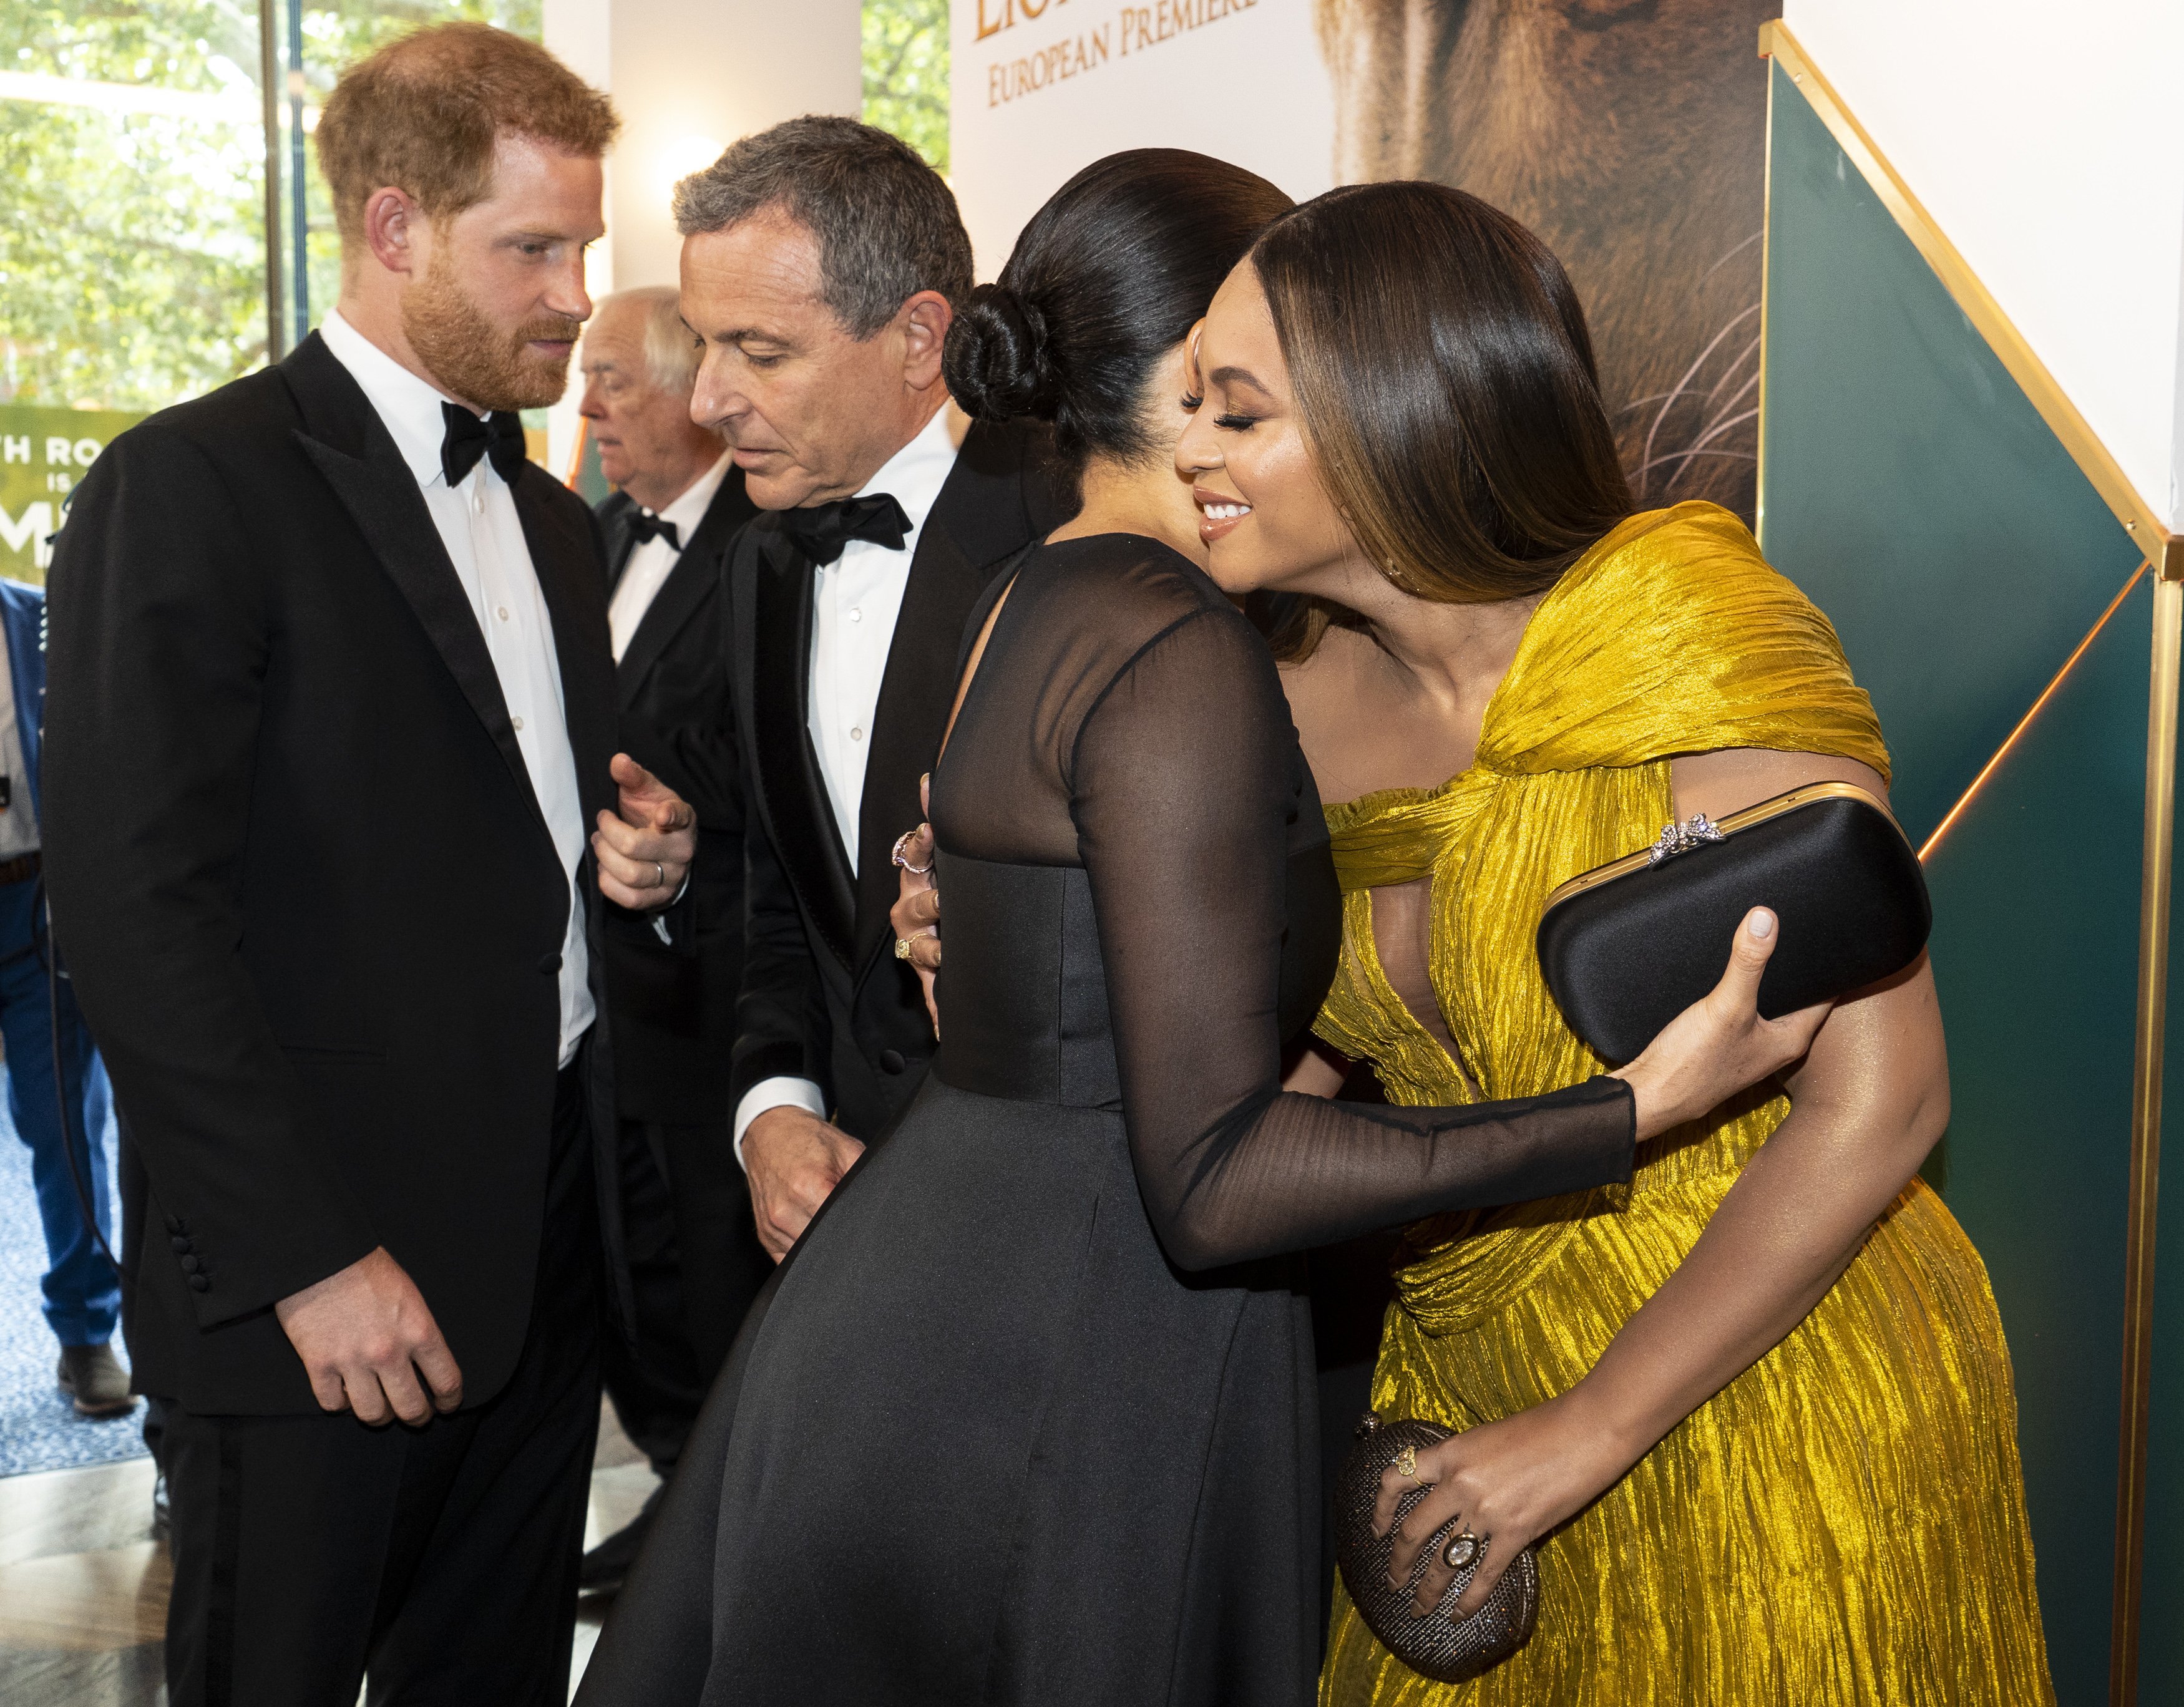 Meghan Markle and Beyonce Knowles embrace at "The Lion King" premiere in London on Sunday, July 14 | Photo: Getty Images